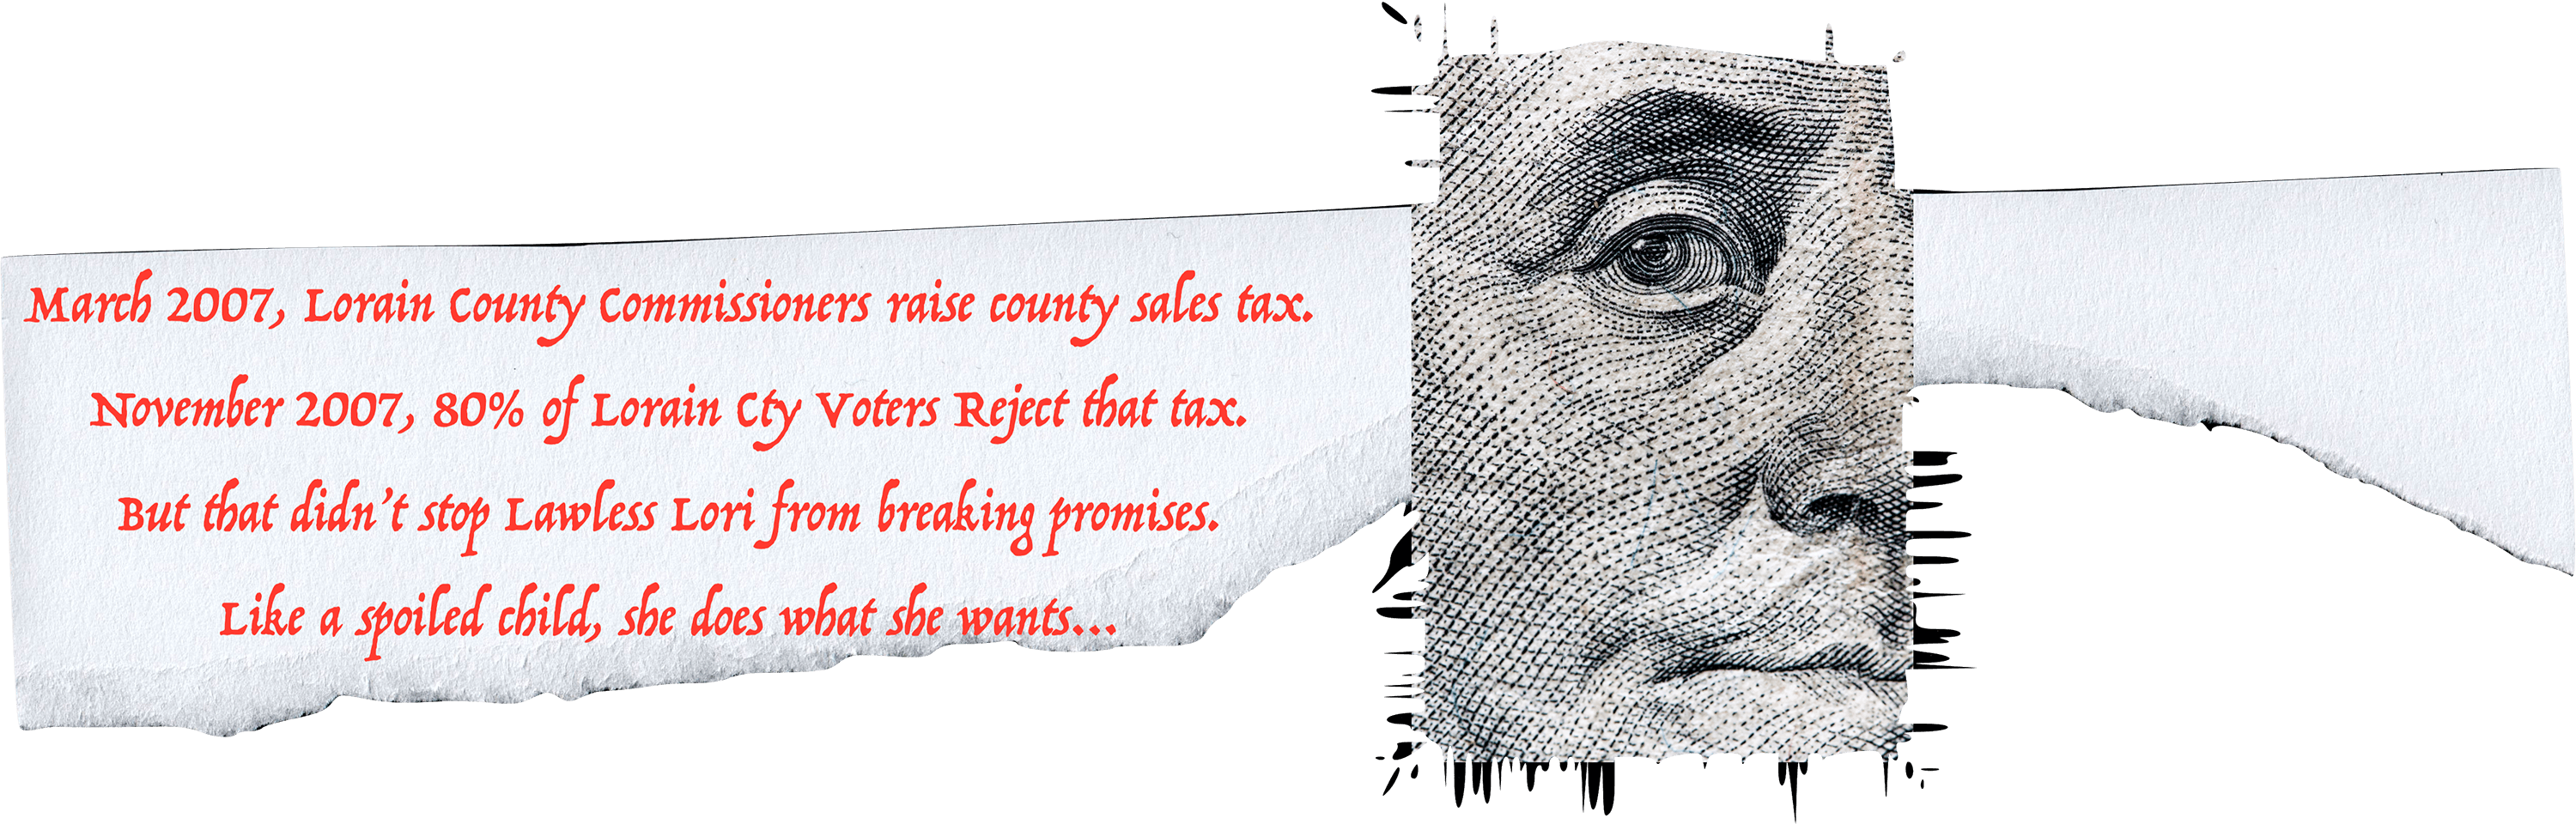 March 2007, Lorain County Commissioners raise county sales tax. November 2007, 80% of Lorain County Voters Reject that tax. But that didn't stop Lawless Lori from breaking promises. Like a spoiled child, she does what she wants...